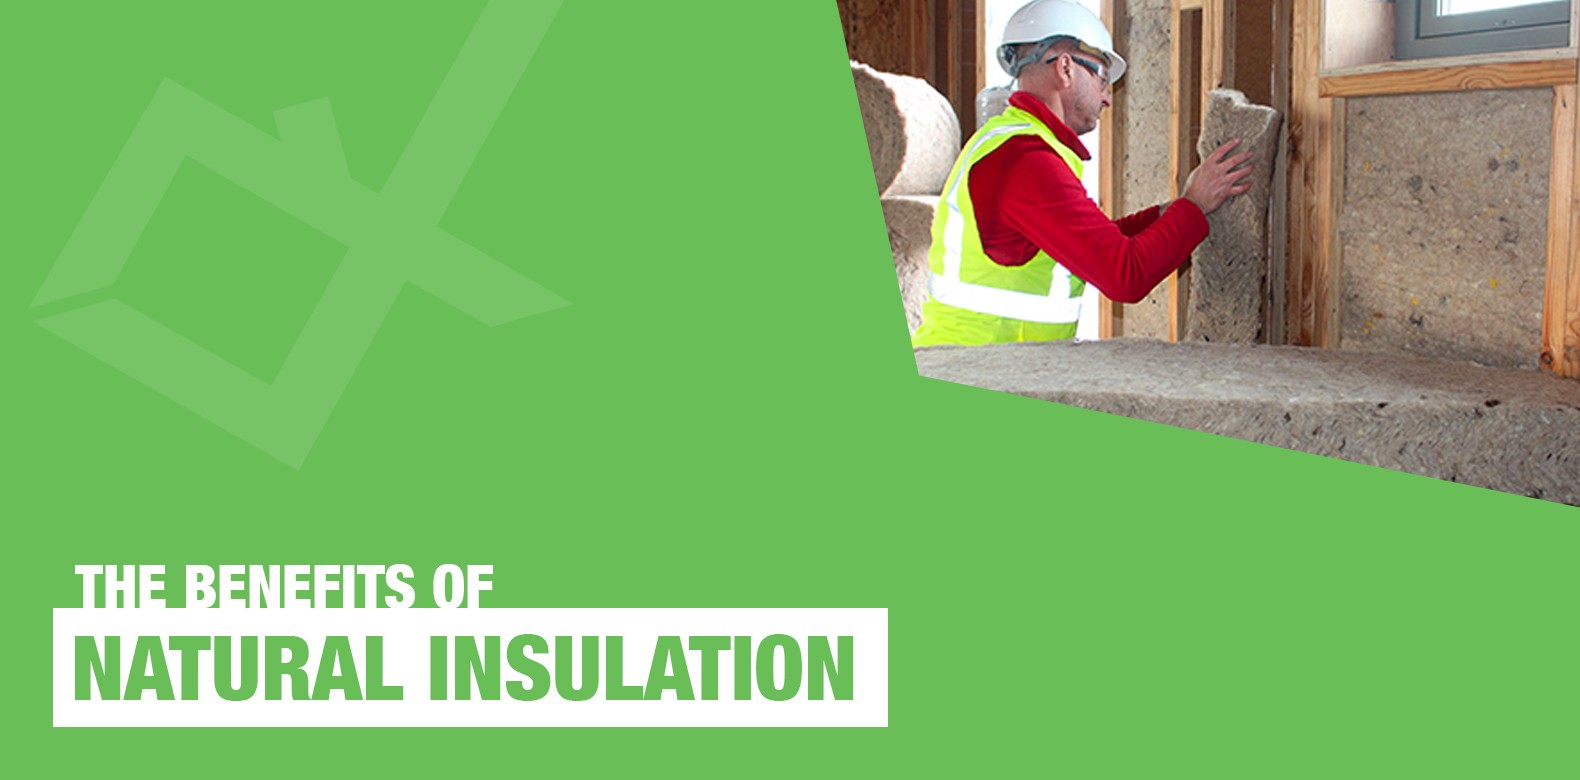 The Benefits of Natural Insulation